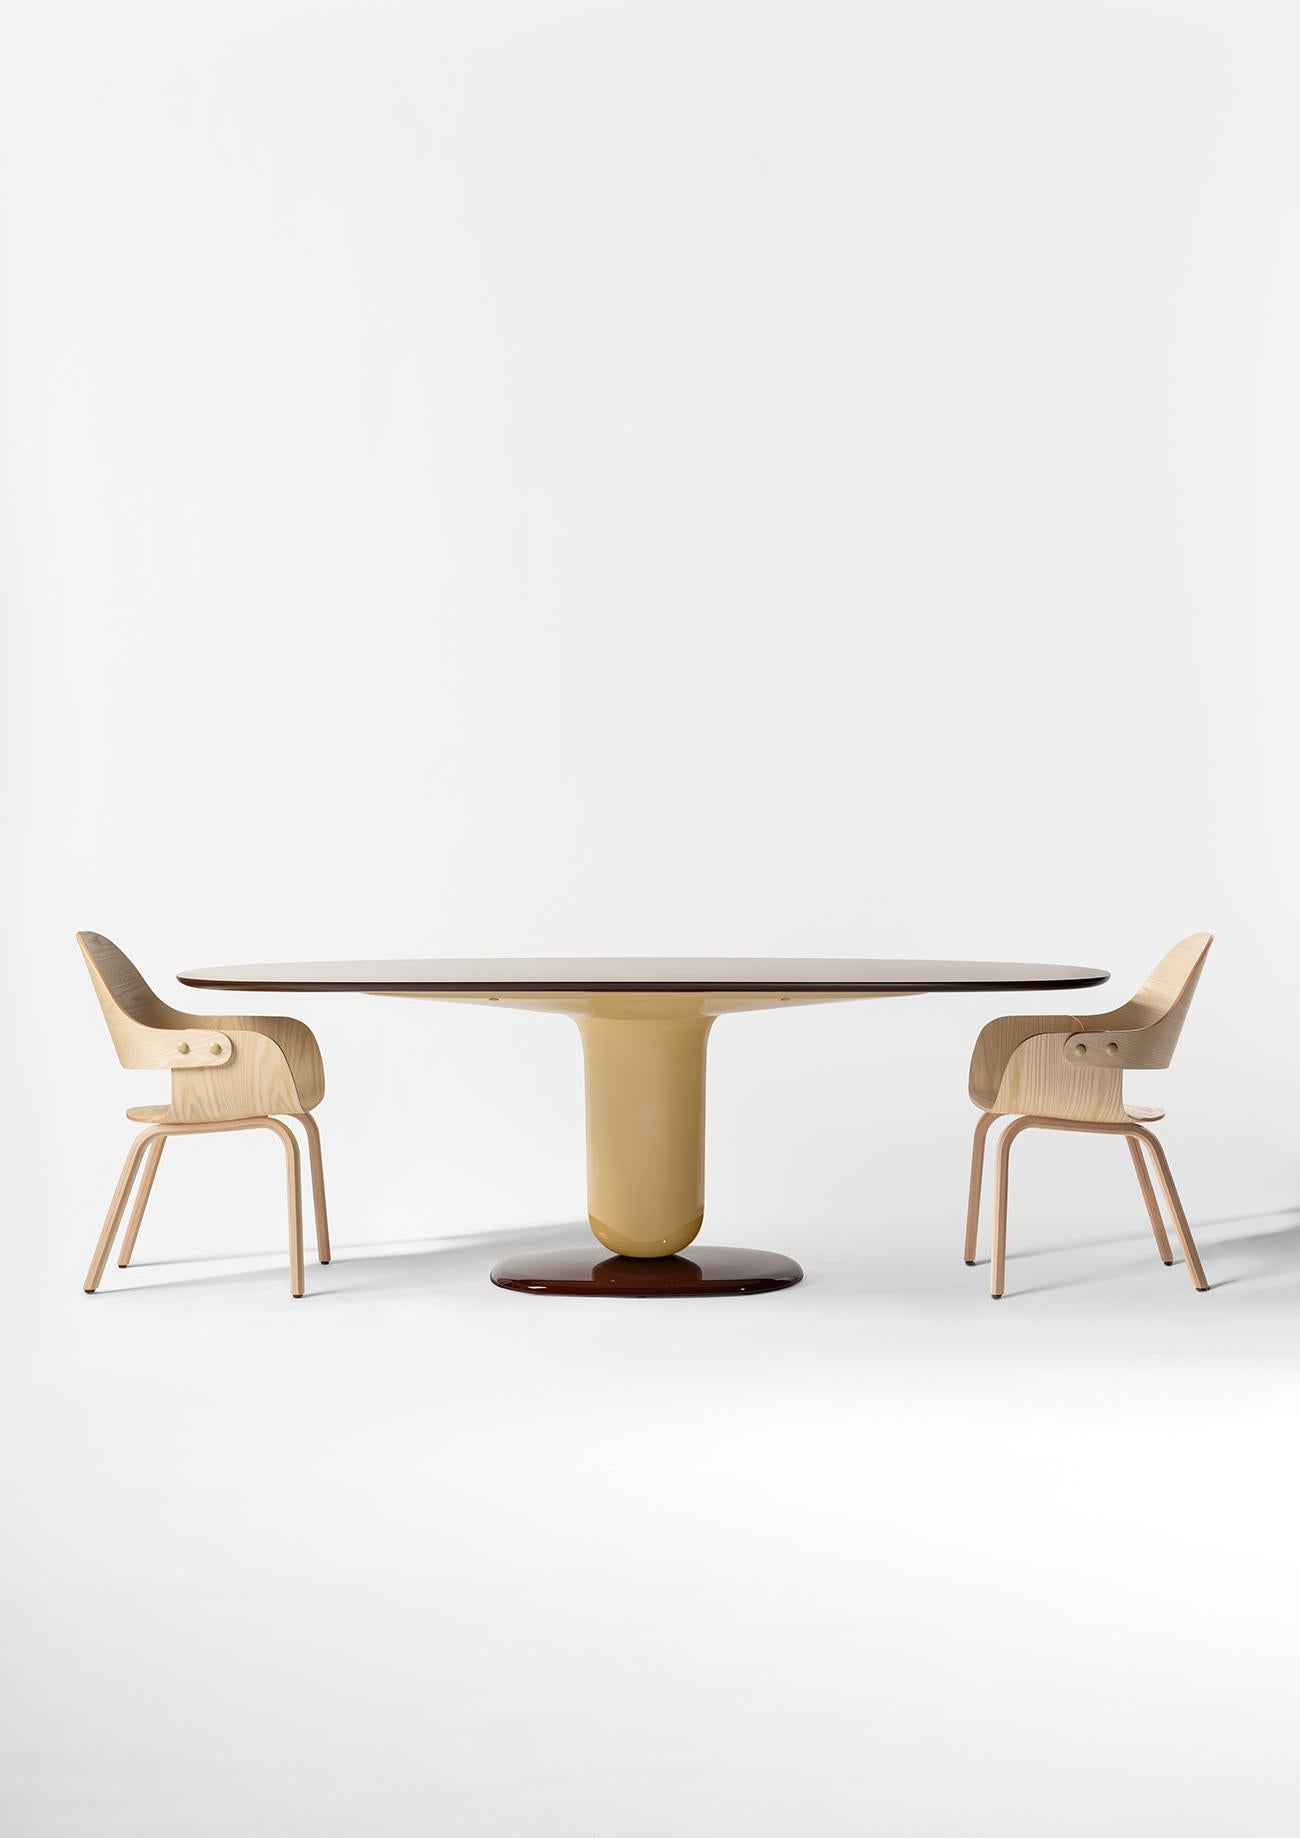 Spanish Dining Table Chesnut brown and Biege Gloss Lacquered Fibreglass by Jaime Hayon